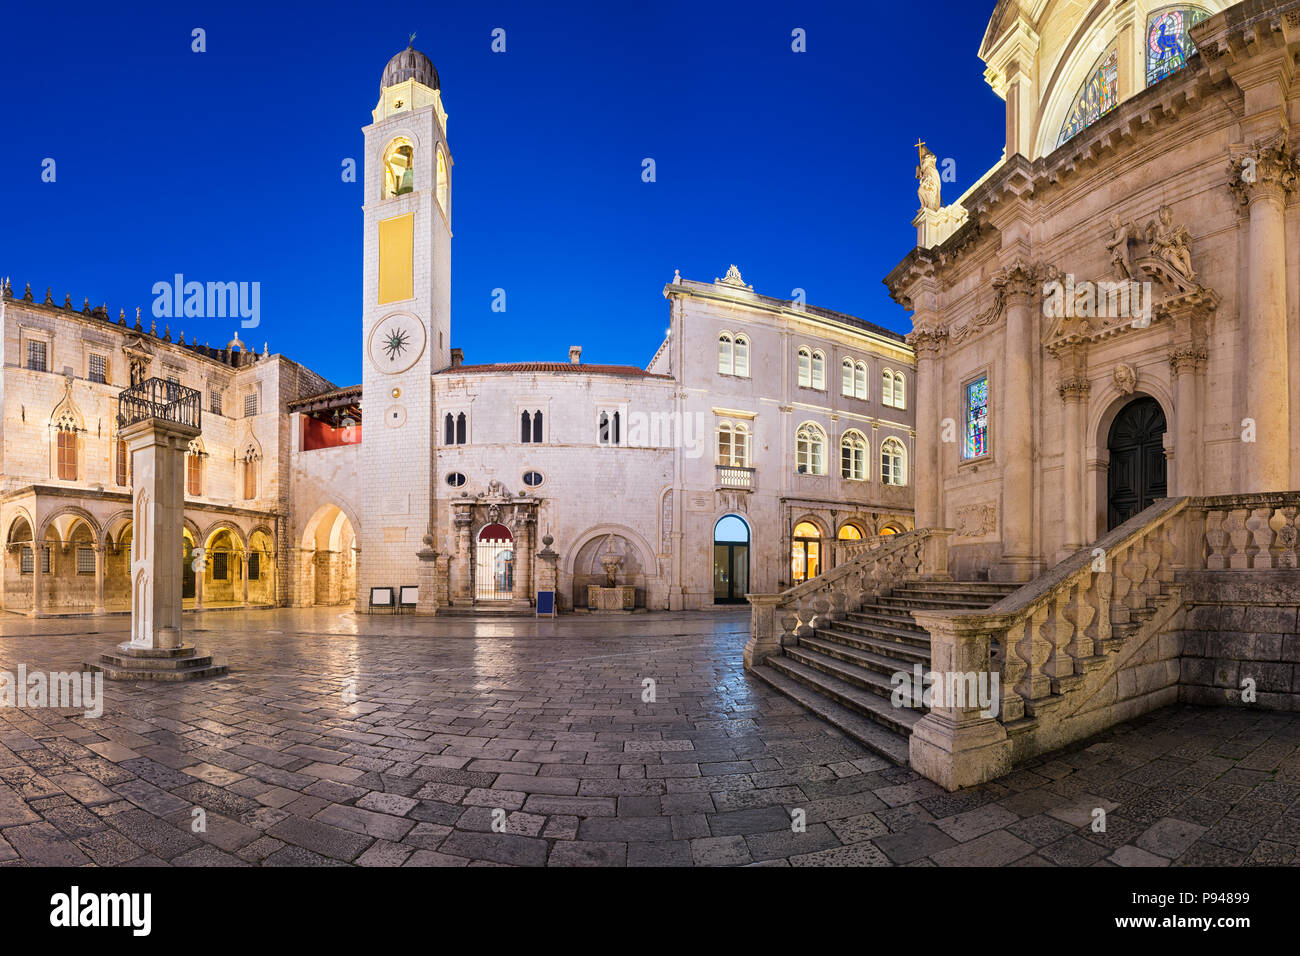 Old town of Dubrovnik at night, Croatia Stock Photo